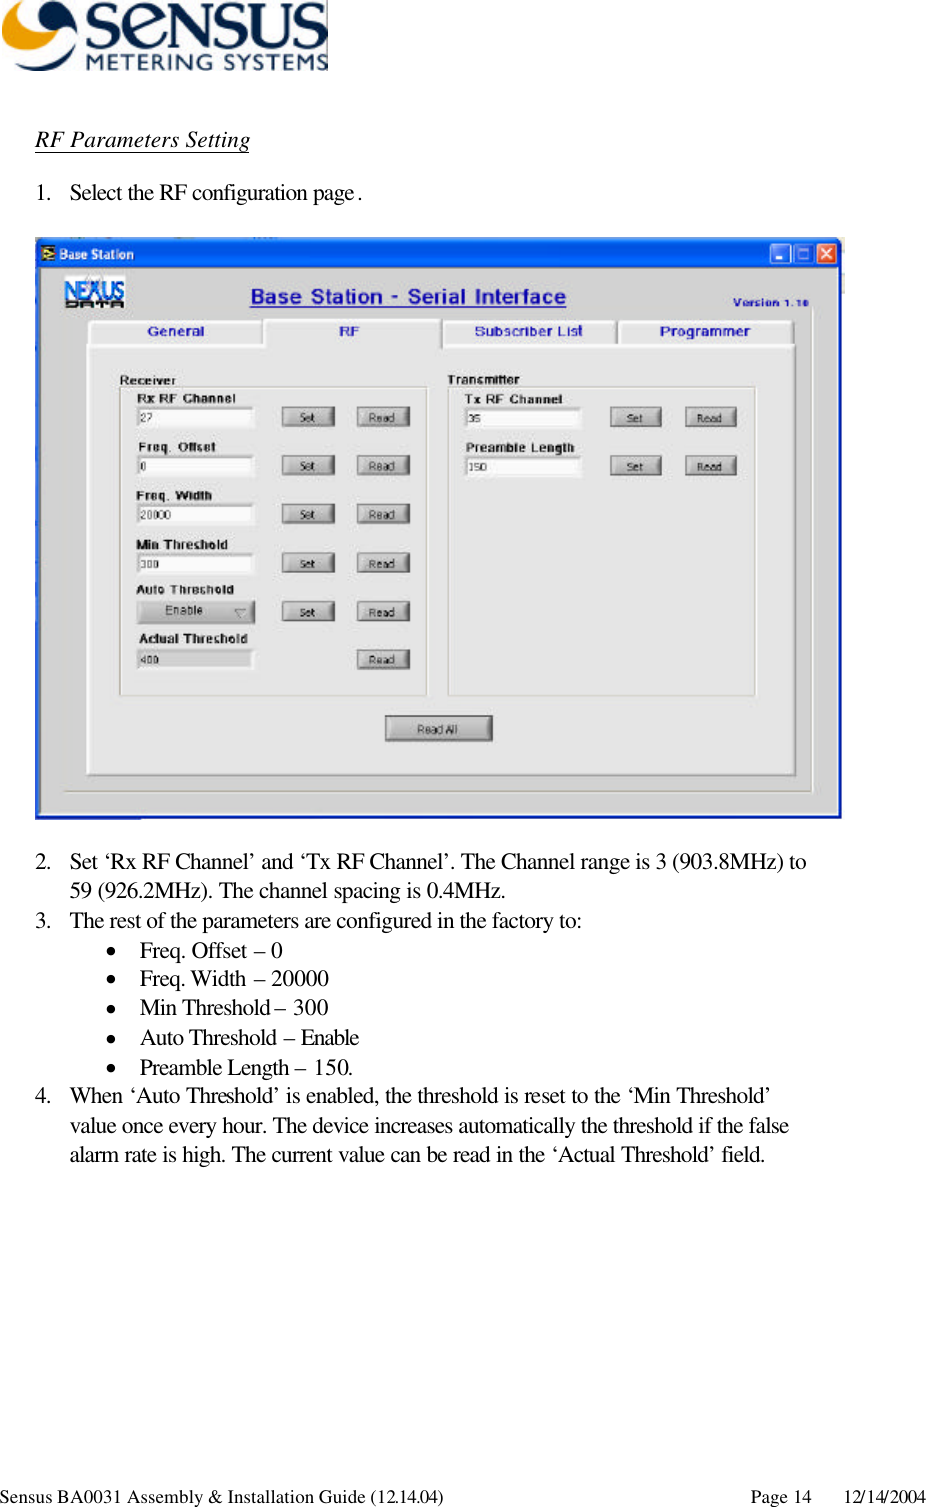      Sensus BA0031 Assembly &amp; Installation Guide (12.14.04) Page 14 12/14/2004 RF Parameters Setting 1. Select the RF configuration page.    2. Set ‘Rx RF Channel’ and ‘Tx RF Channel’. The Channel range is 3 (903.8MHz) to 59 (926.2MHz). The channel spacing is 0.4MHz. 3. The rest of the parameters are configured in the factory to: • Freq. Offset – 0 • Freq. Width – 20000 • Min Threshold – 300 • Auto Threshold – Enable • Preamble Length – 150. 4. When ‘Auto Threshold’ is enabled, the threshold is reset to the ‘Min Threshold’ value once every hour. The device increases automatically the threshold if the false alarm rate is high. The current value can be read in the ‘Actual Threshold’ field.   